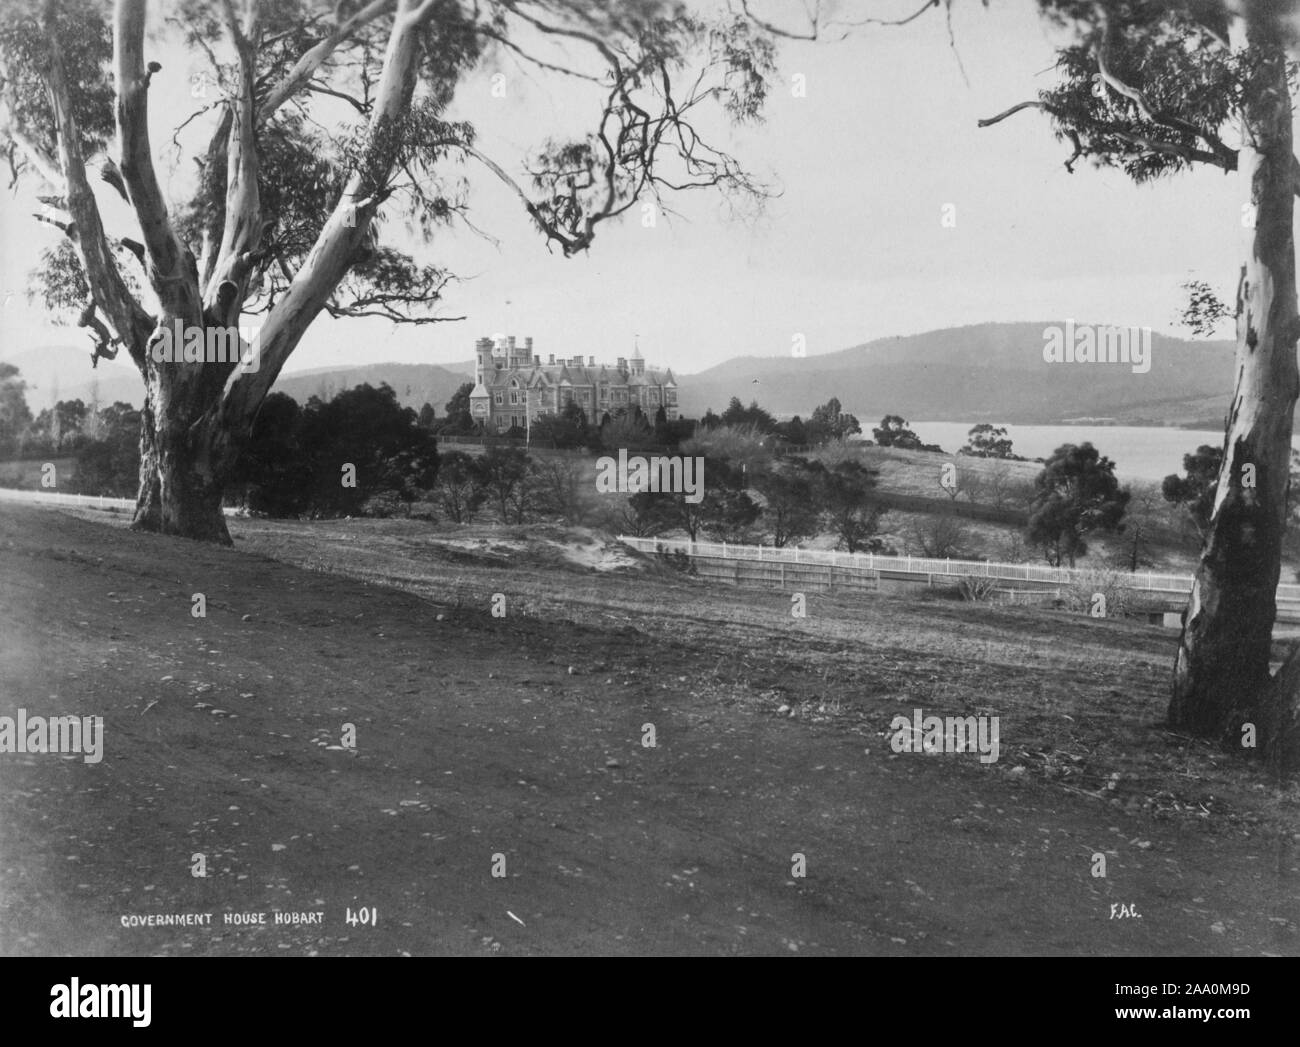 Black and white landscape photograph of a rural area featuring Government House, the official residence of the Governor of Tasmania in Hobart, Tasmania, Australia, by photographer Frank Coxhead, 1885. From the New York Public Library. () Stock Photo